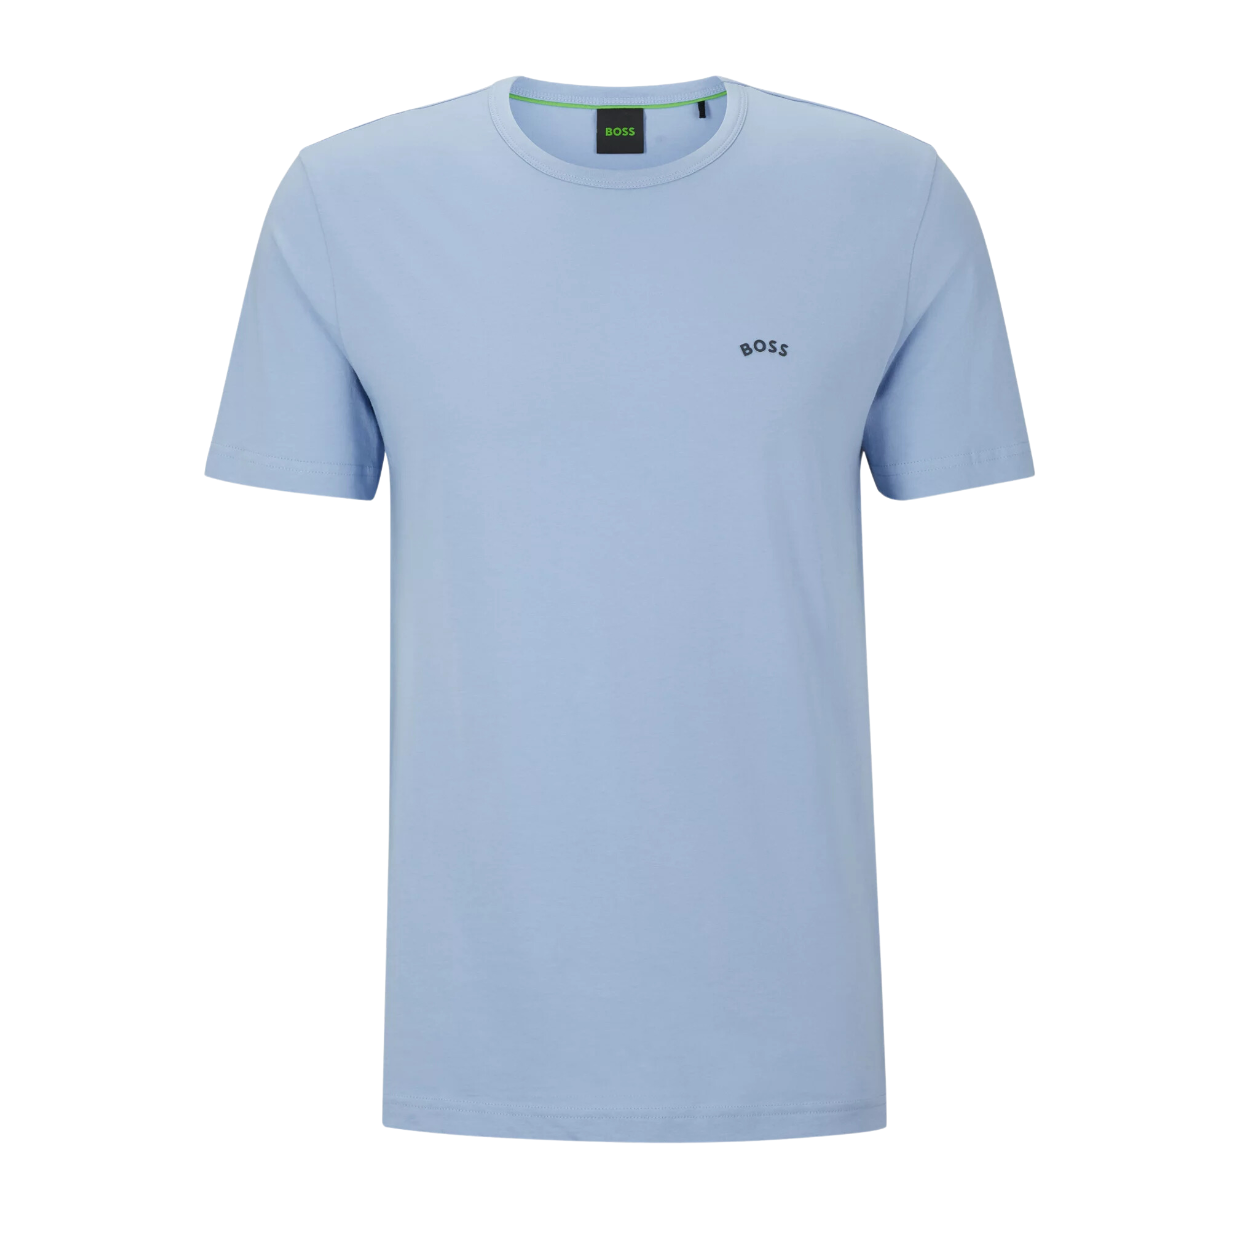 BOSS Blue Curved Tee